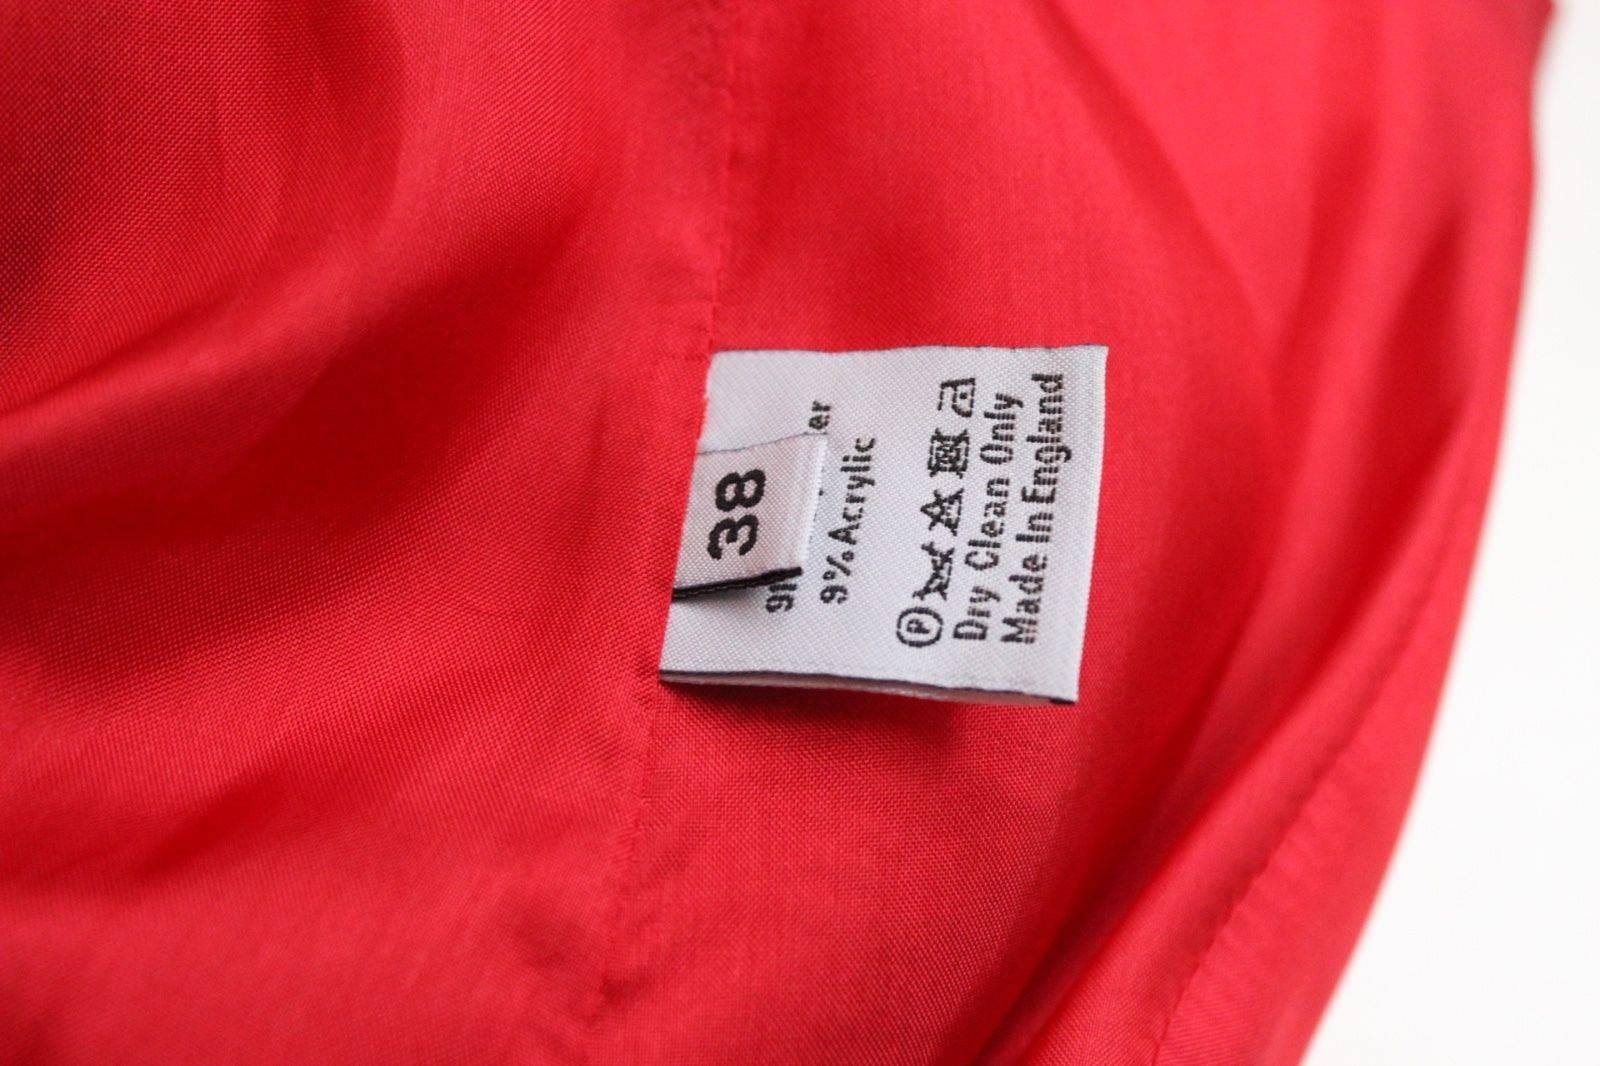 Hussein Chalayan A/W 2012 Ready-To-Wear Catwalk Red Dress I 38 uk 6   For Sale 4